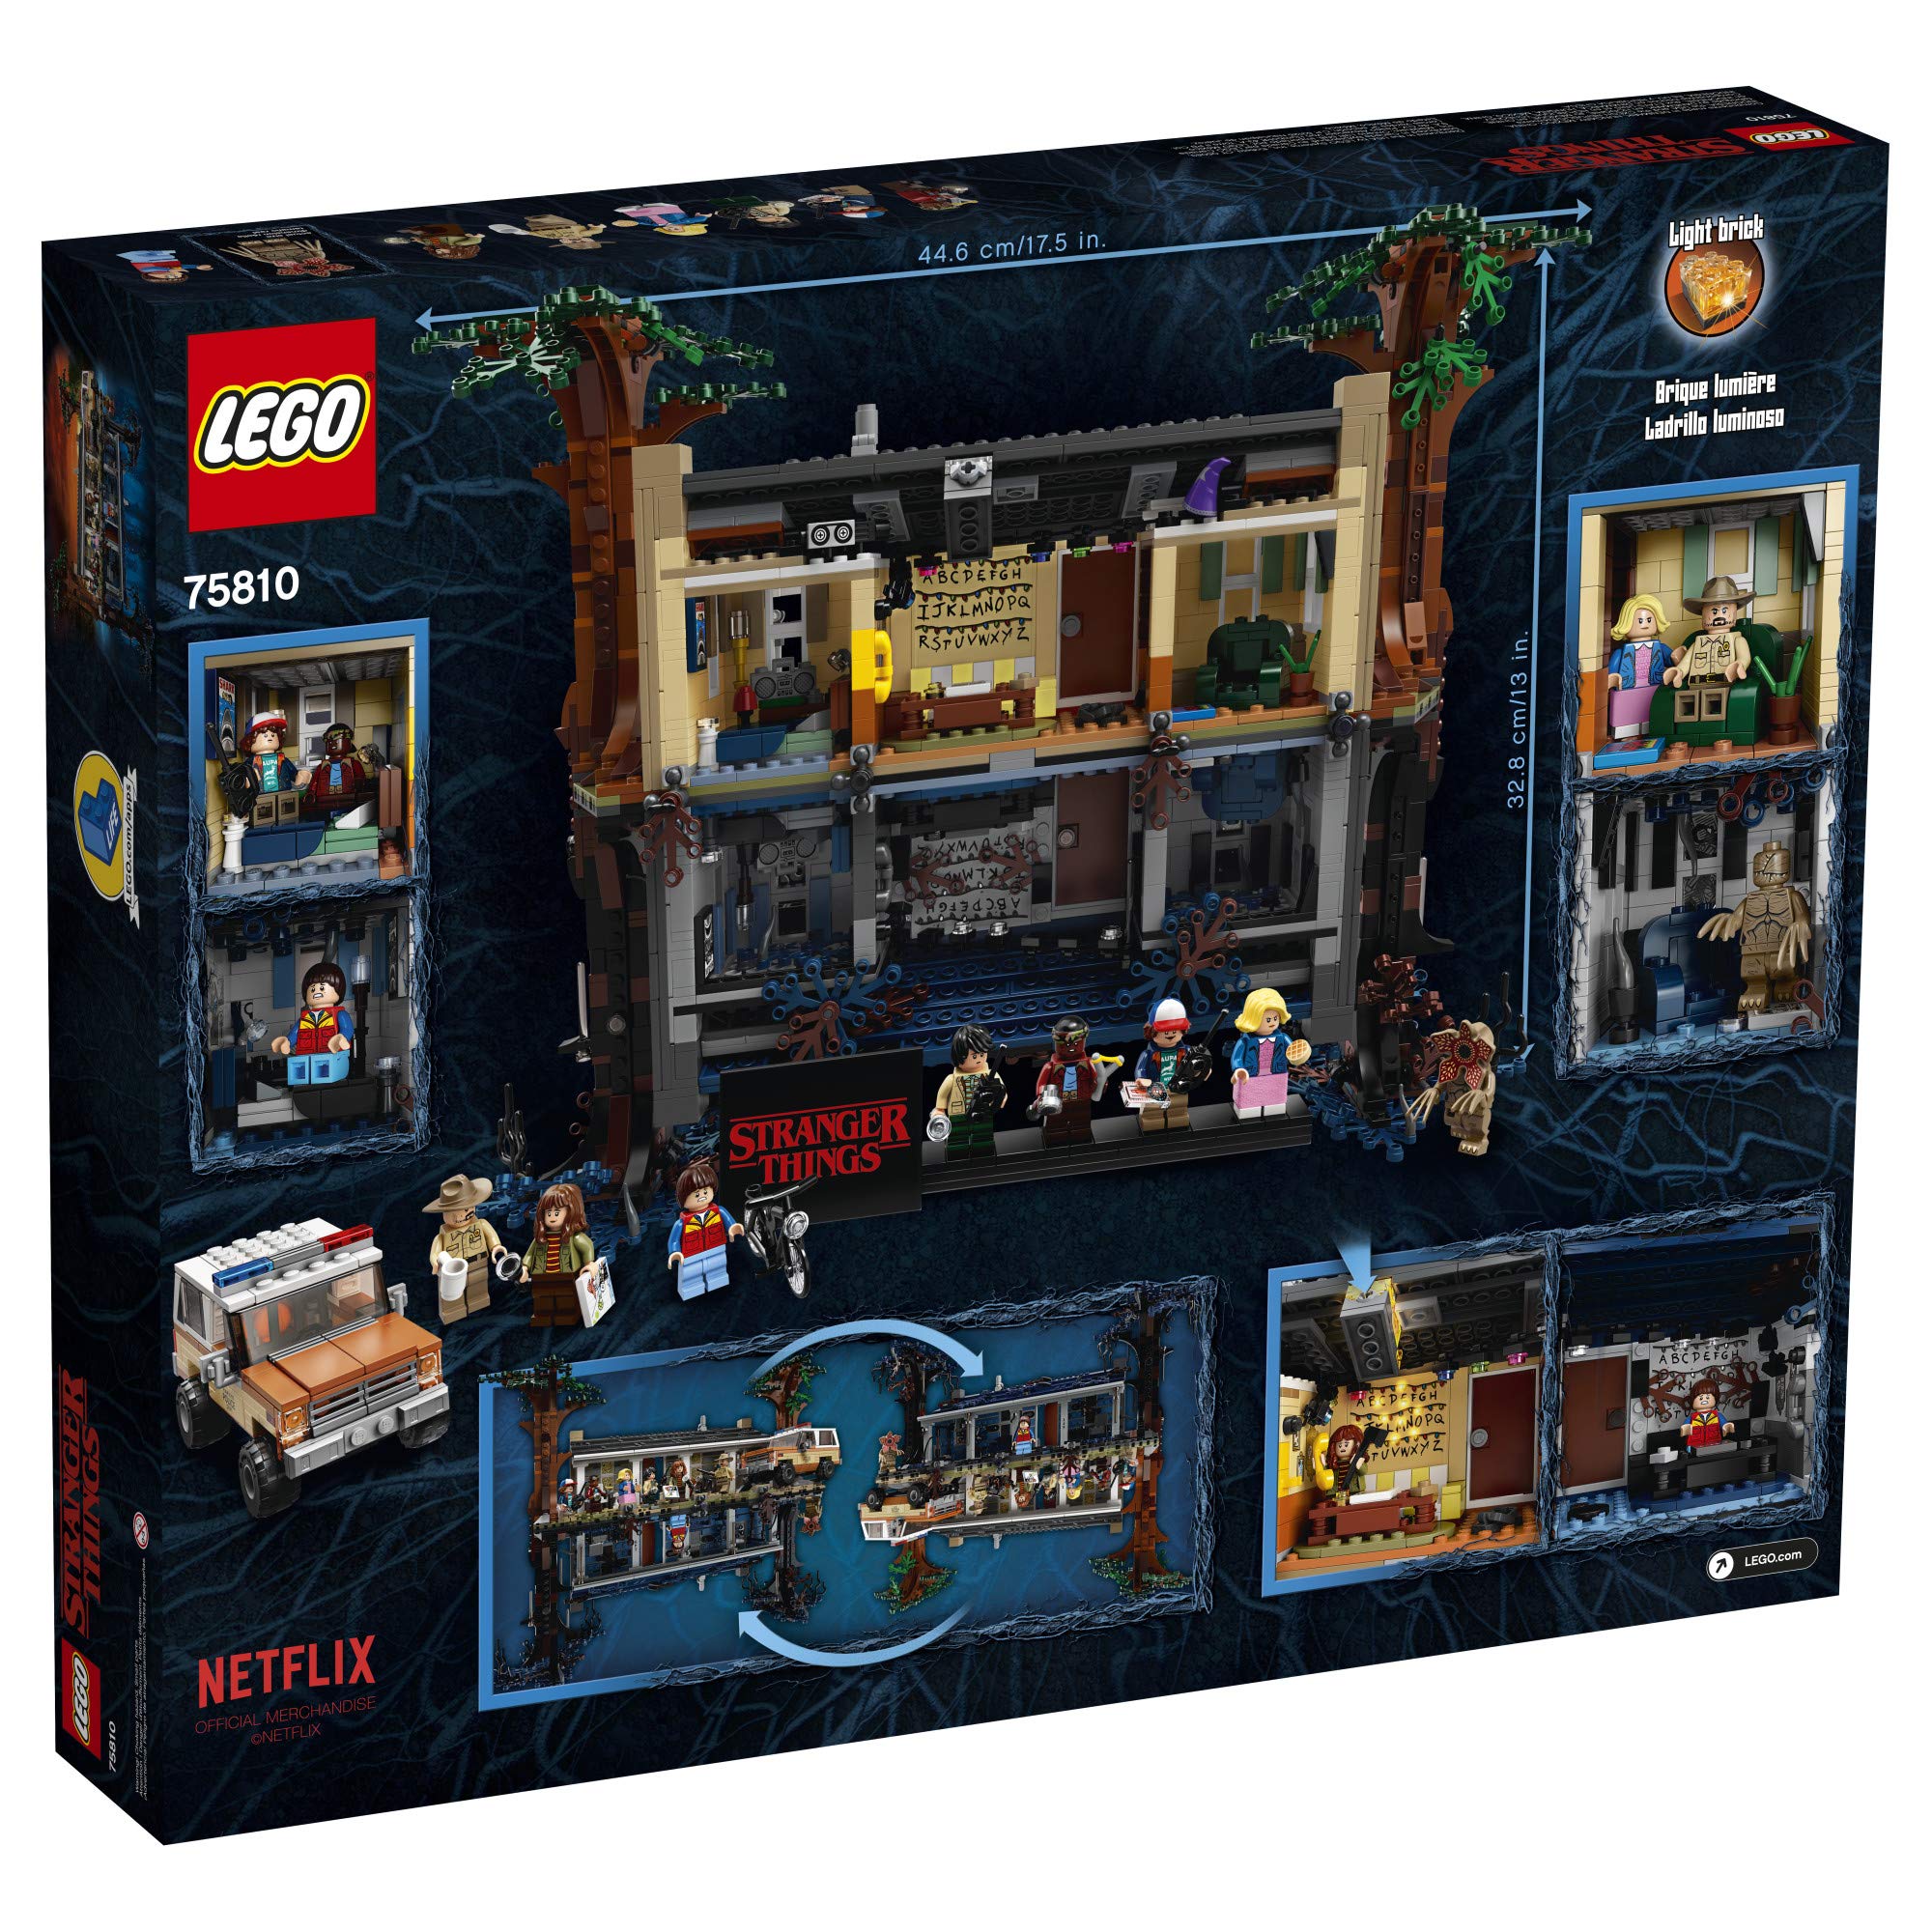 LEGO Stranger Things The Upside Down 75810 Building Kit, New 2019 (2,287 Pieces)